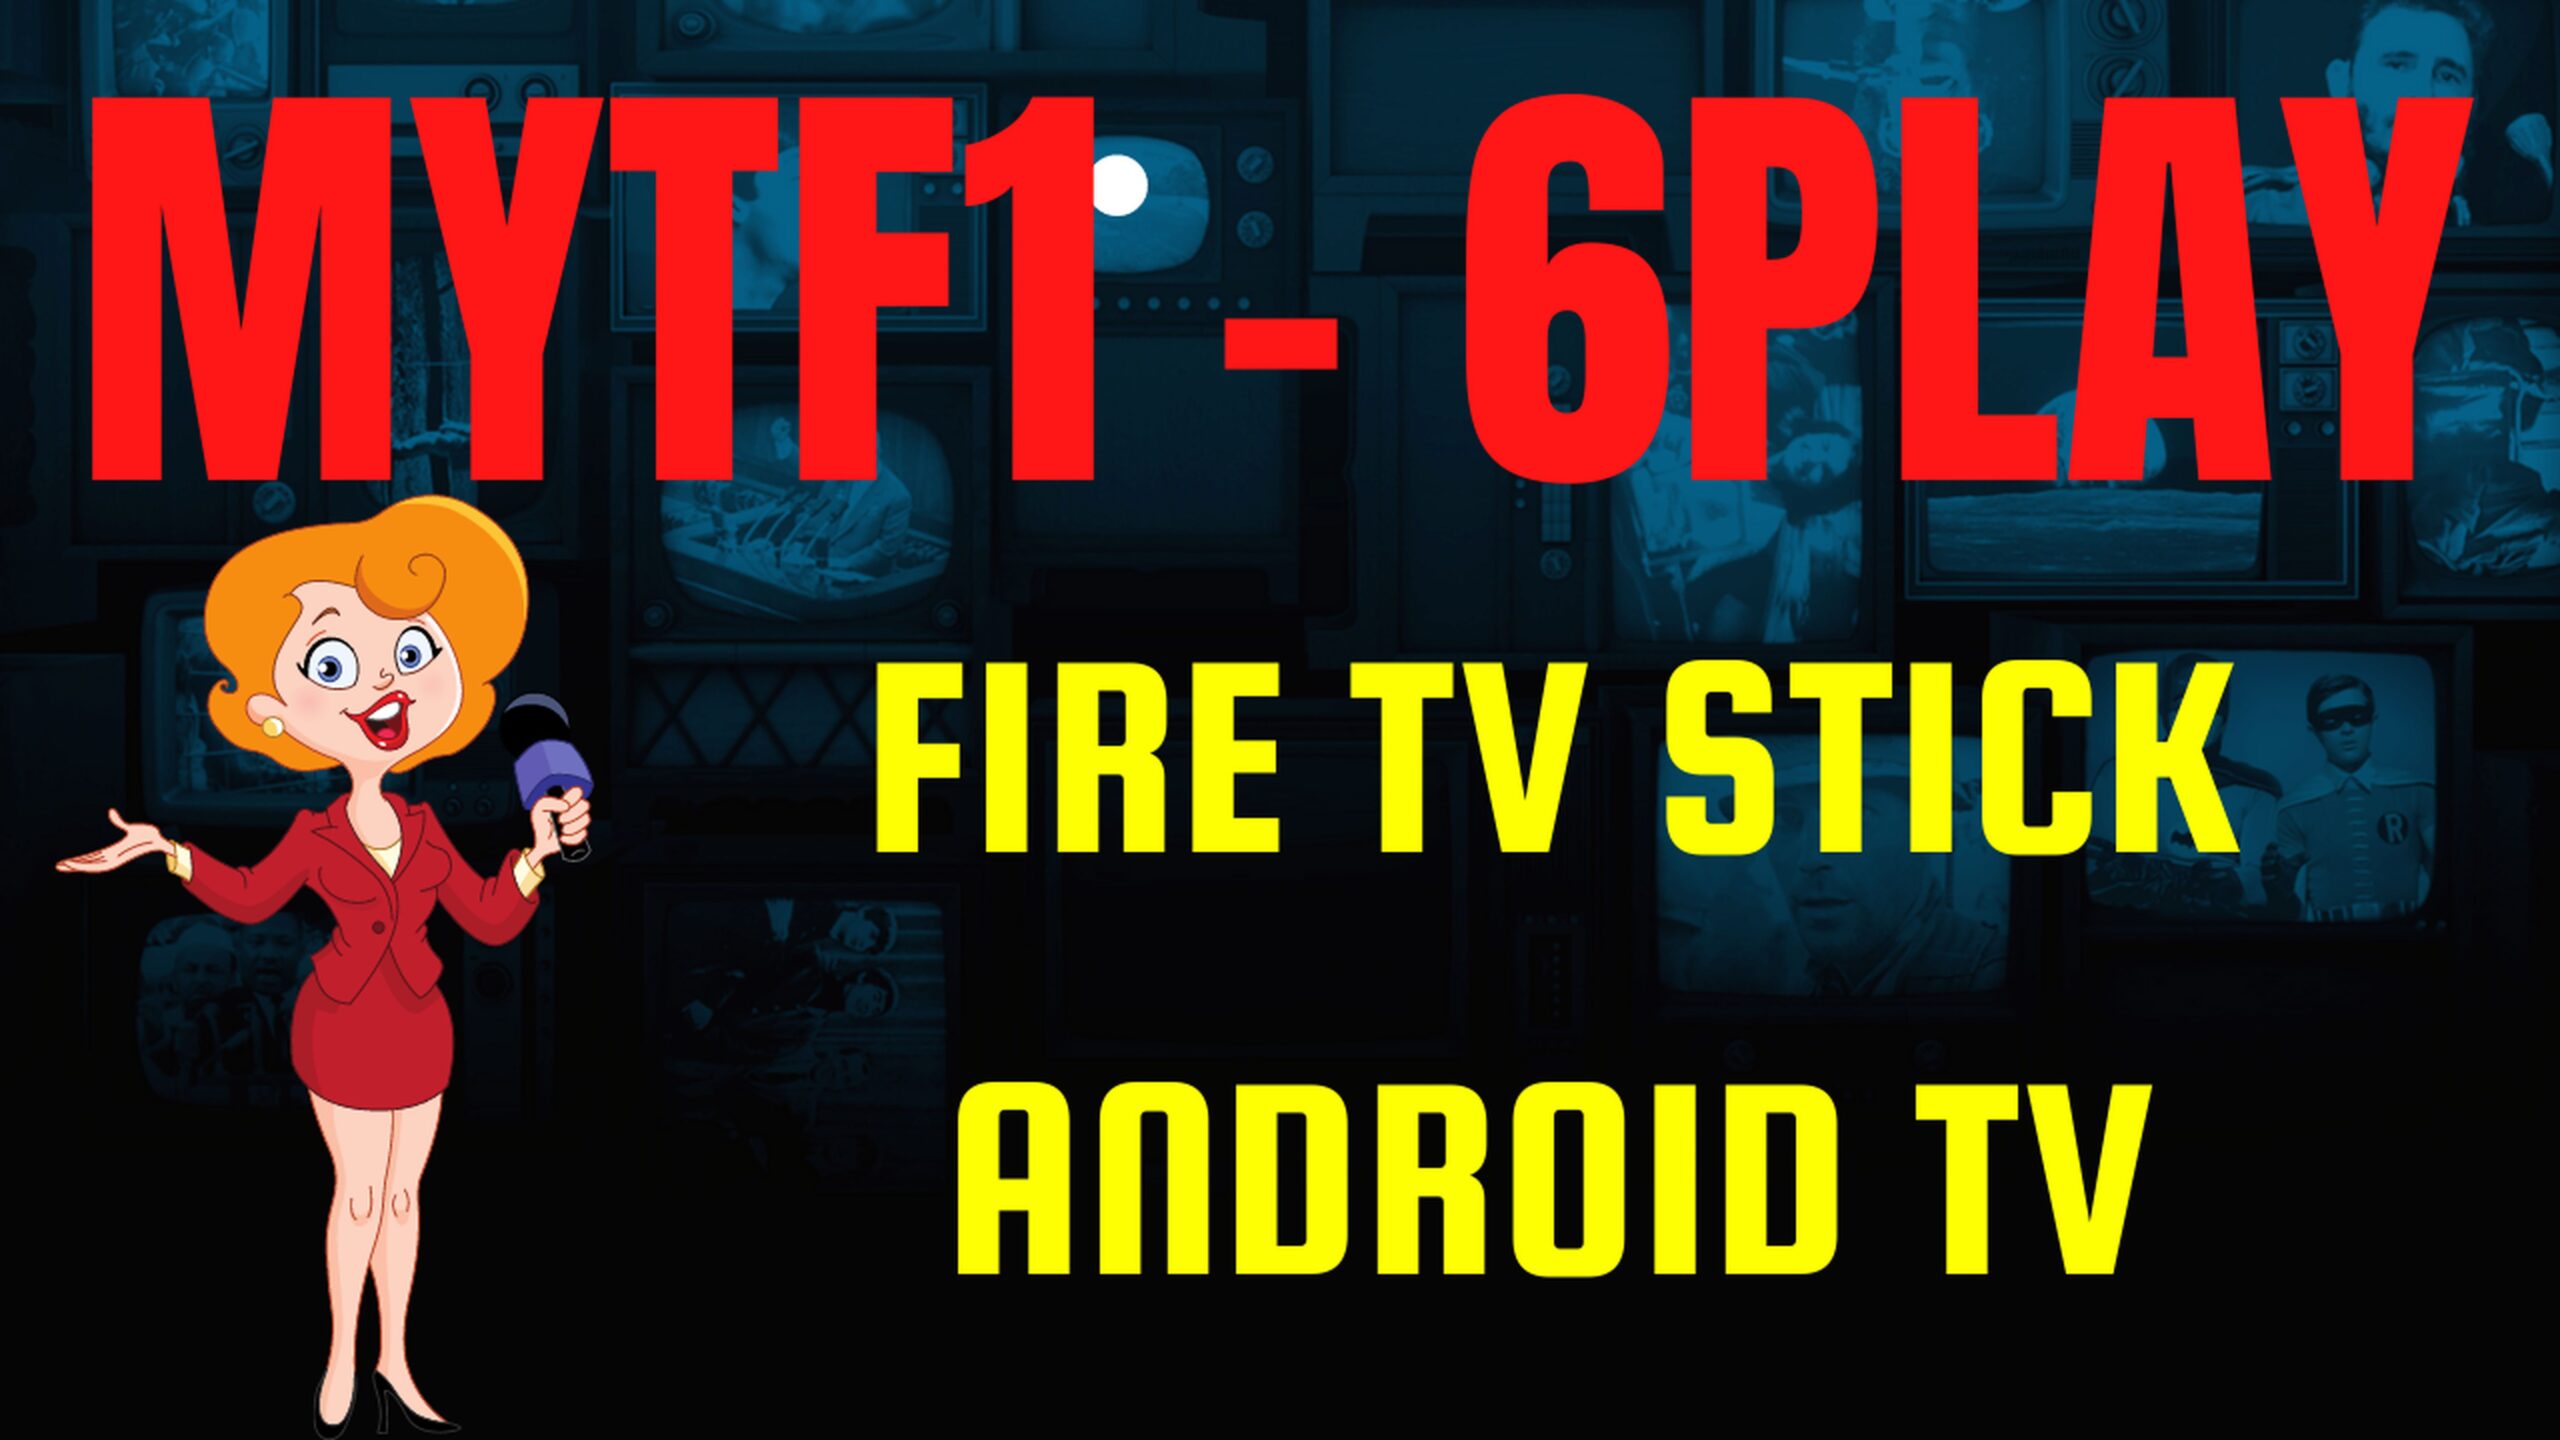 Installer MyTF1 et 6Play (Direct - Replay) sur Fire TV Stick / Android TV 12